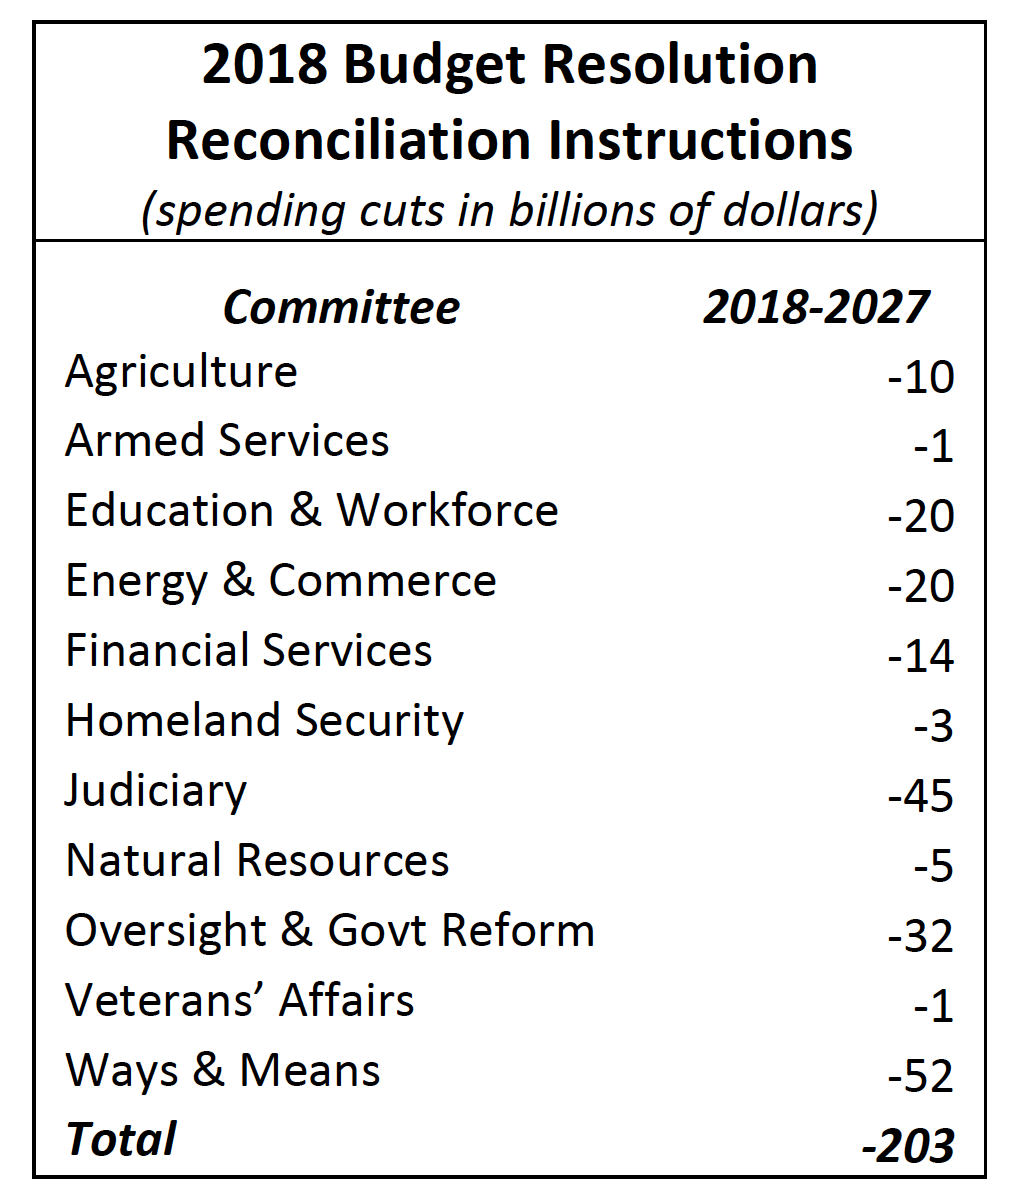 2018 Budget Resolution Reconciliation Instructions (spending cuts in billions of dollars)